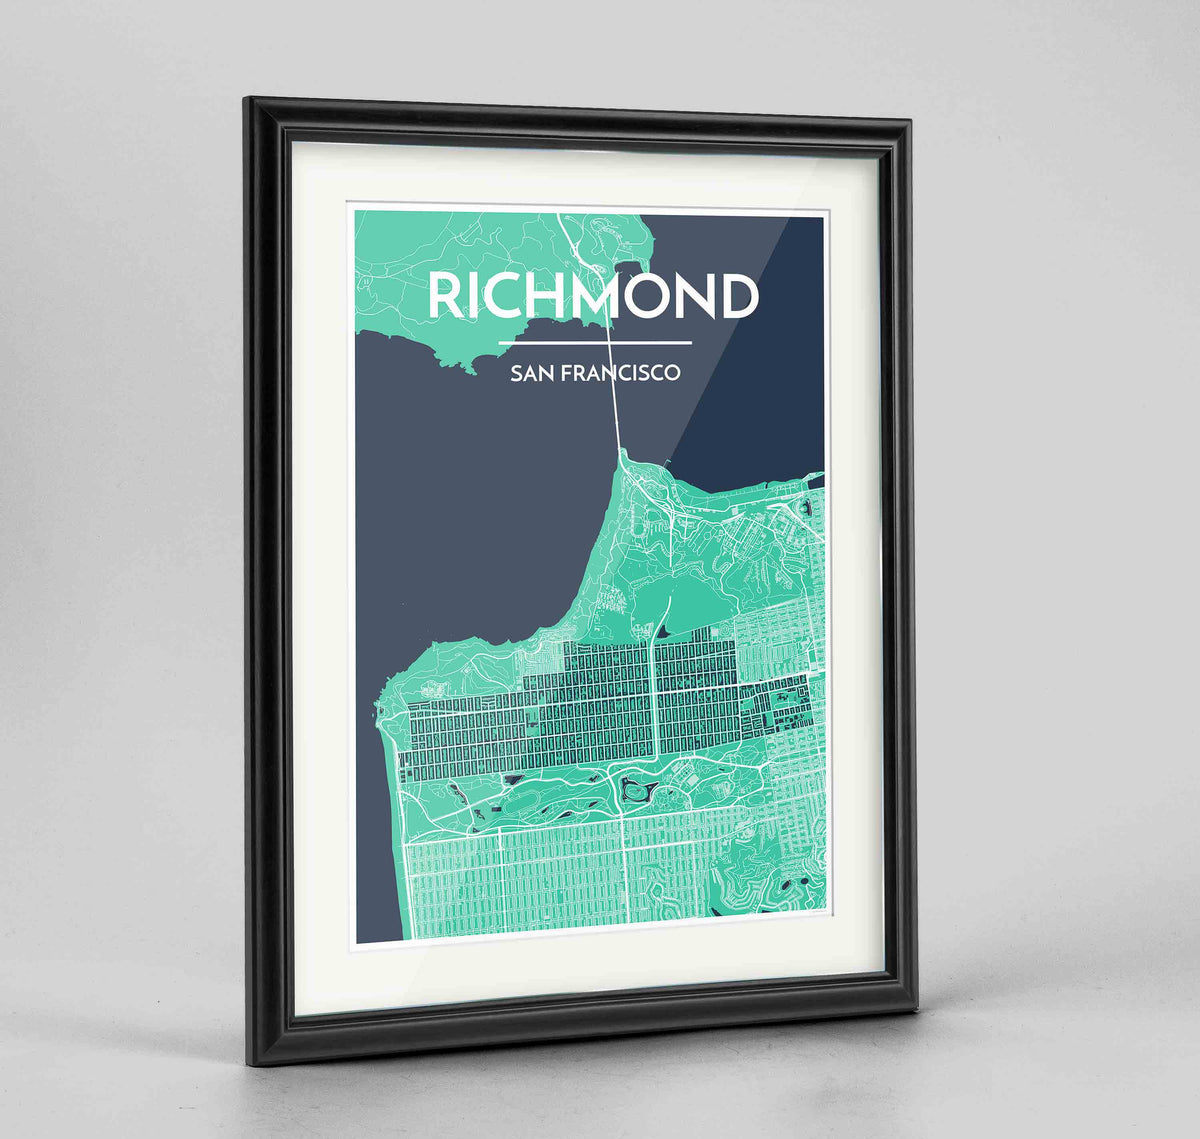 Framed The Richmond District San Francisco Map Art Print 24x36&quot; Traditional Black frame Point Two Design Group